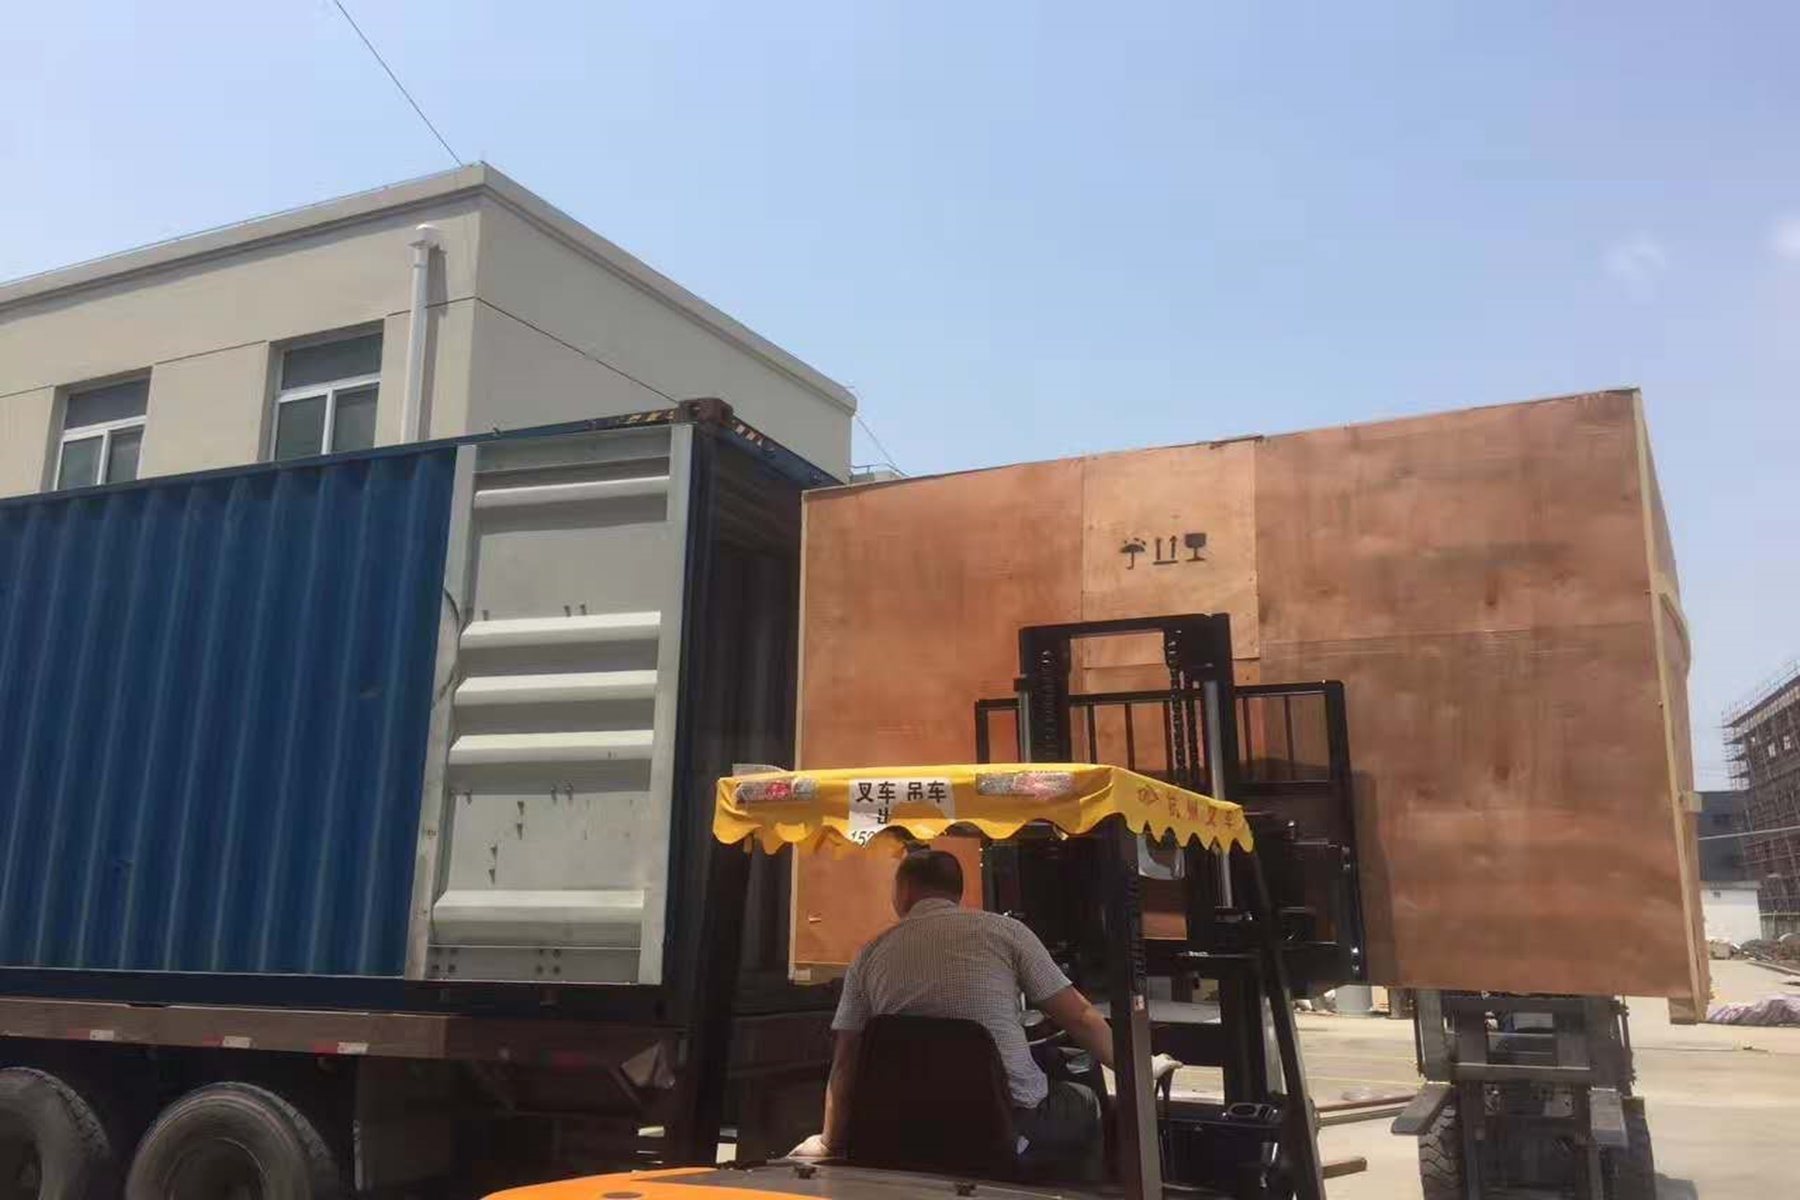 Loading of equipment into containers